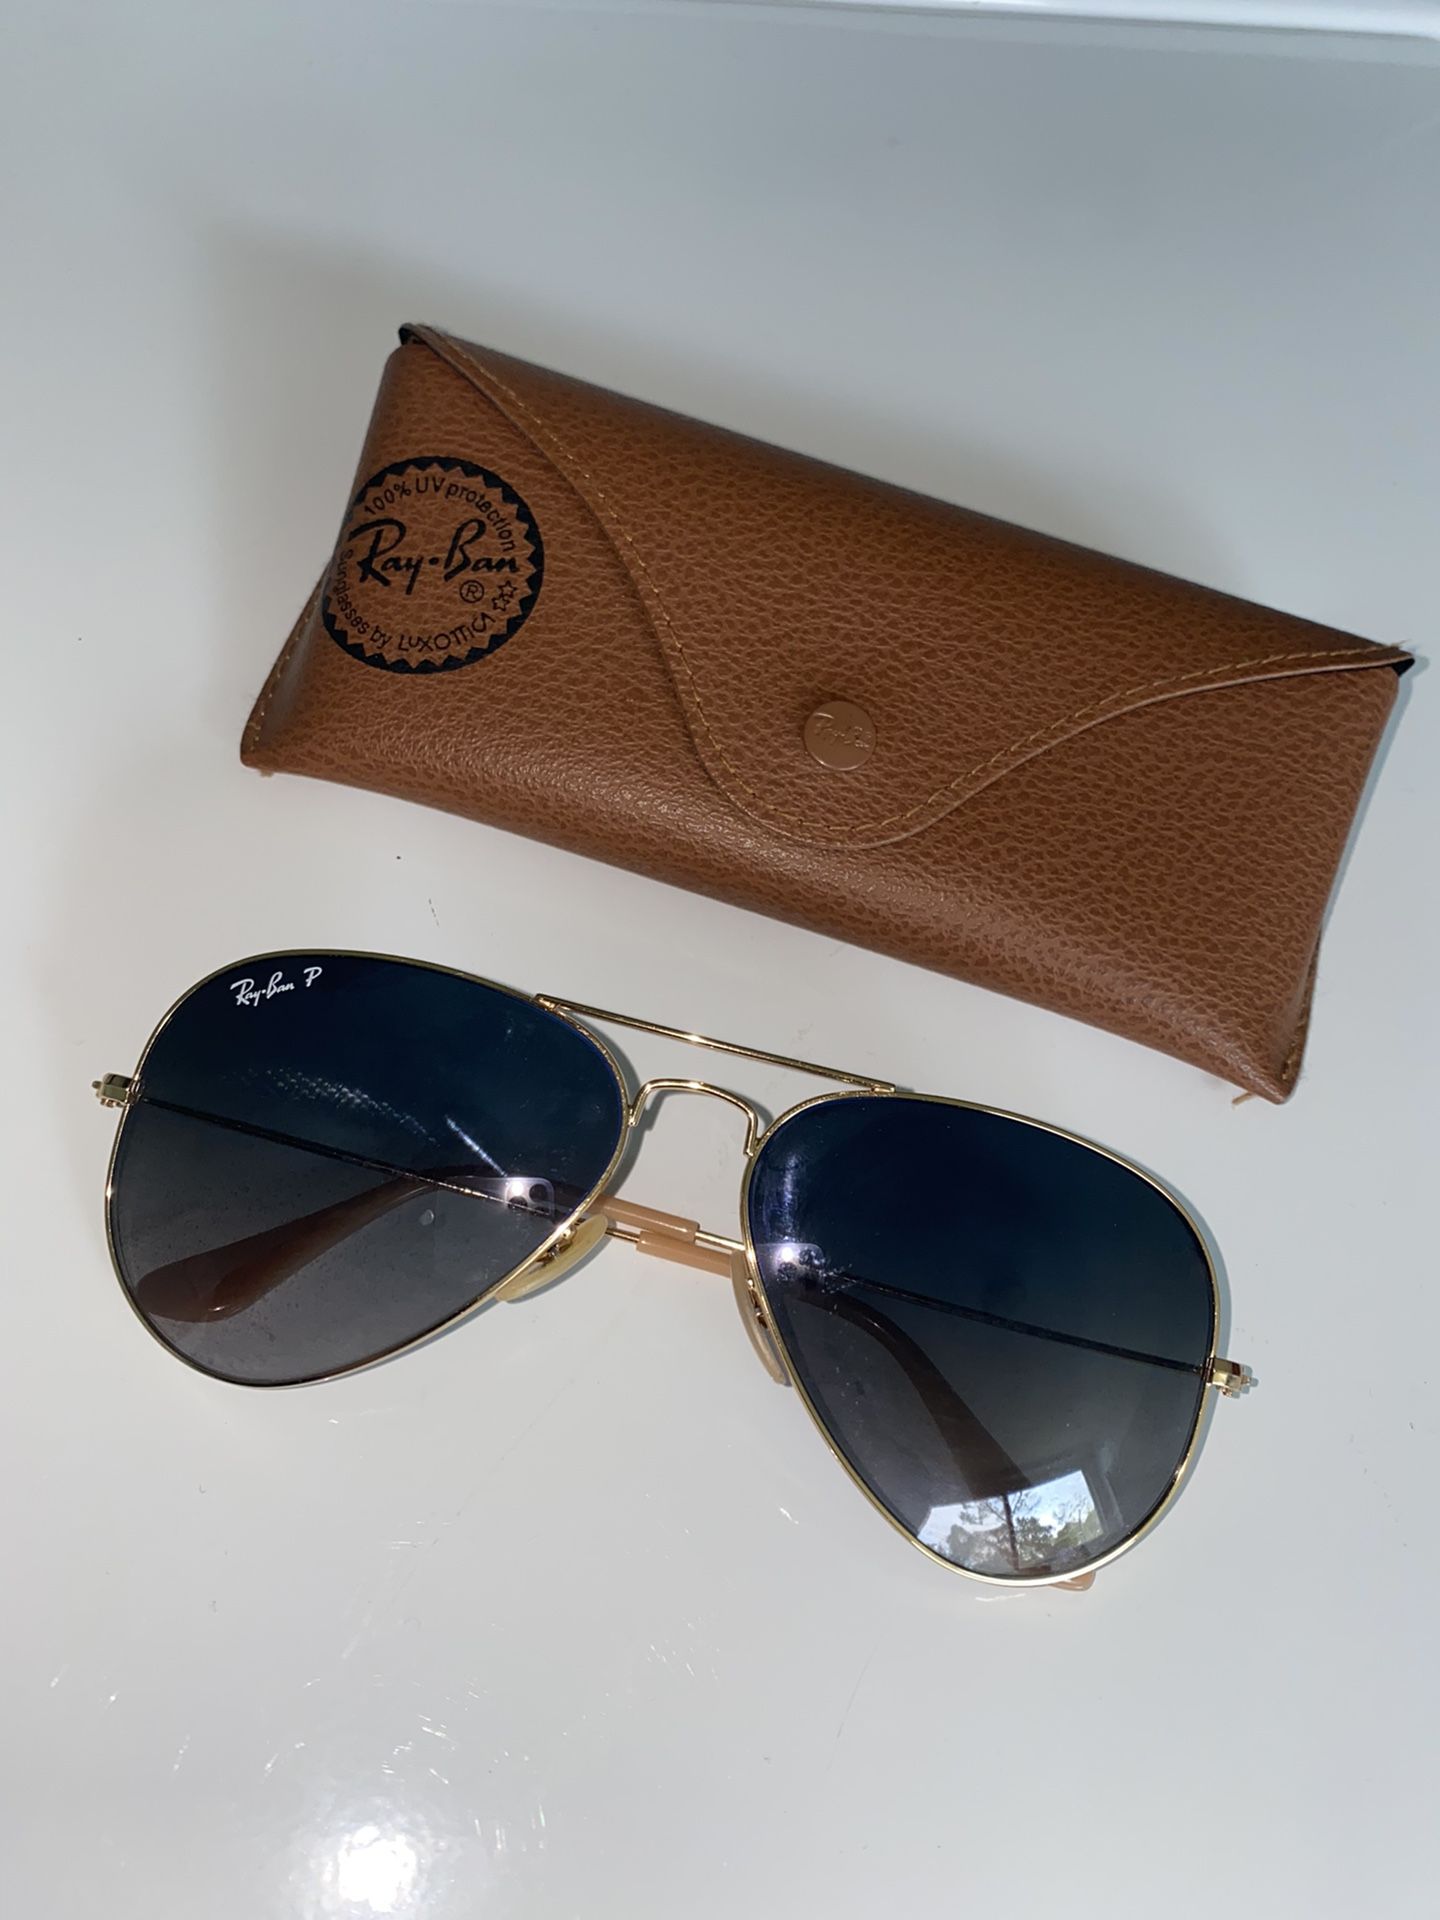 Brand new Ray-Bans w/ case